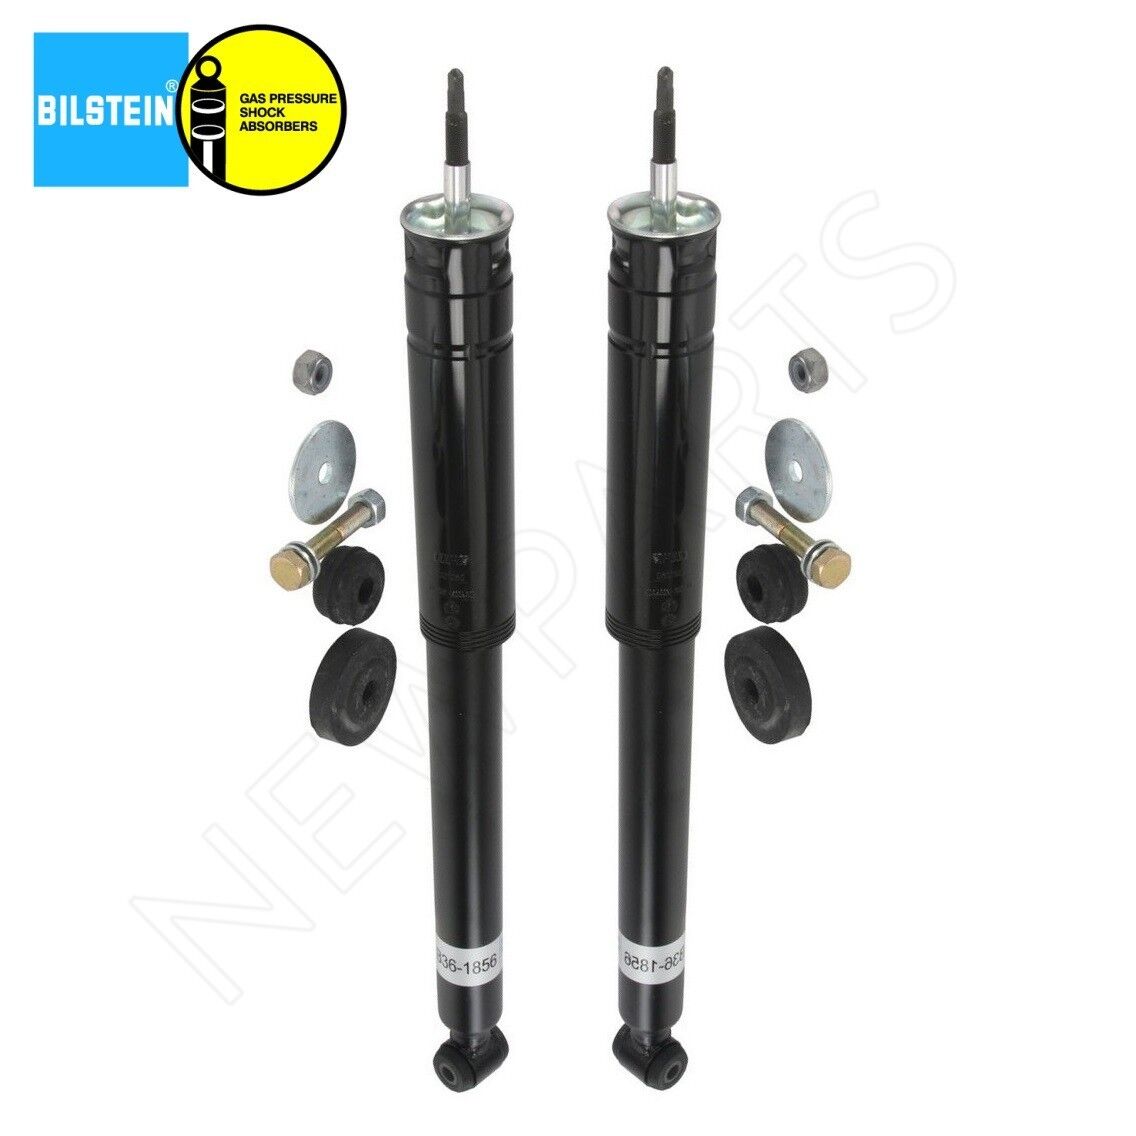 For Mercedes-Benz C-Class W202 Pair Set of 2 Front Shock Absorbers Bilstein B4